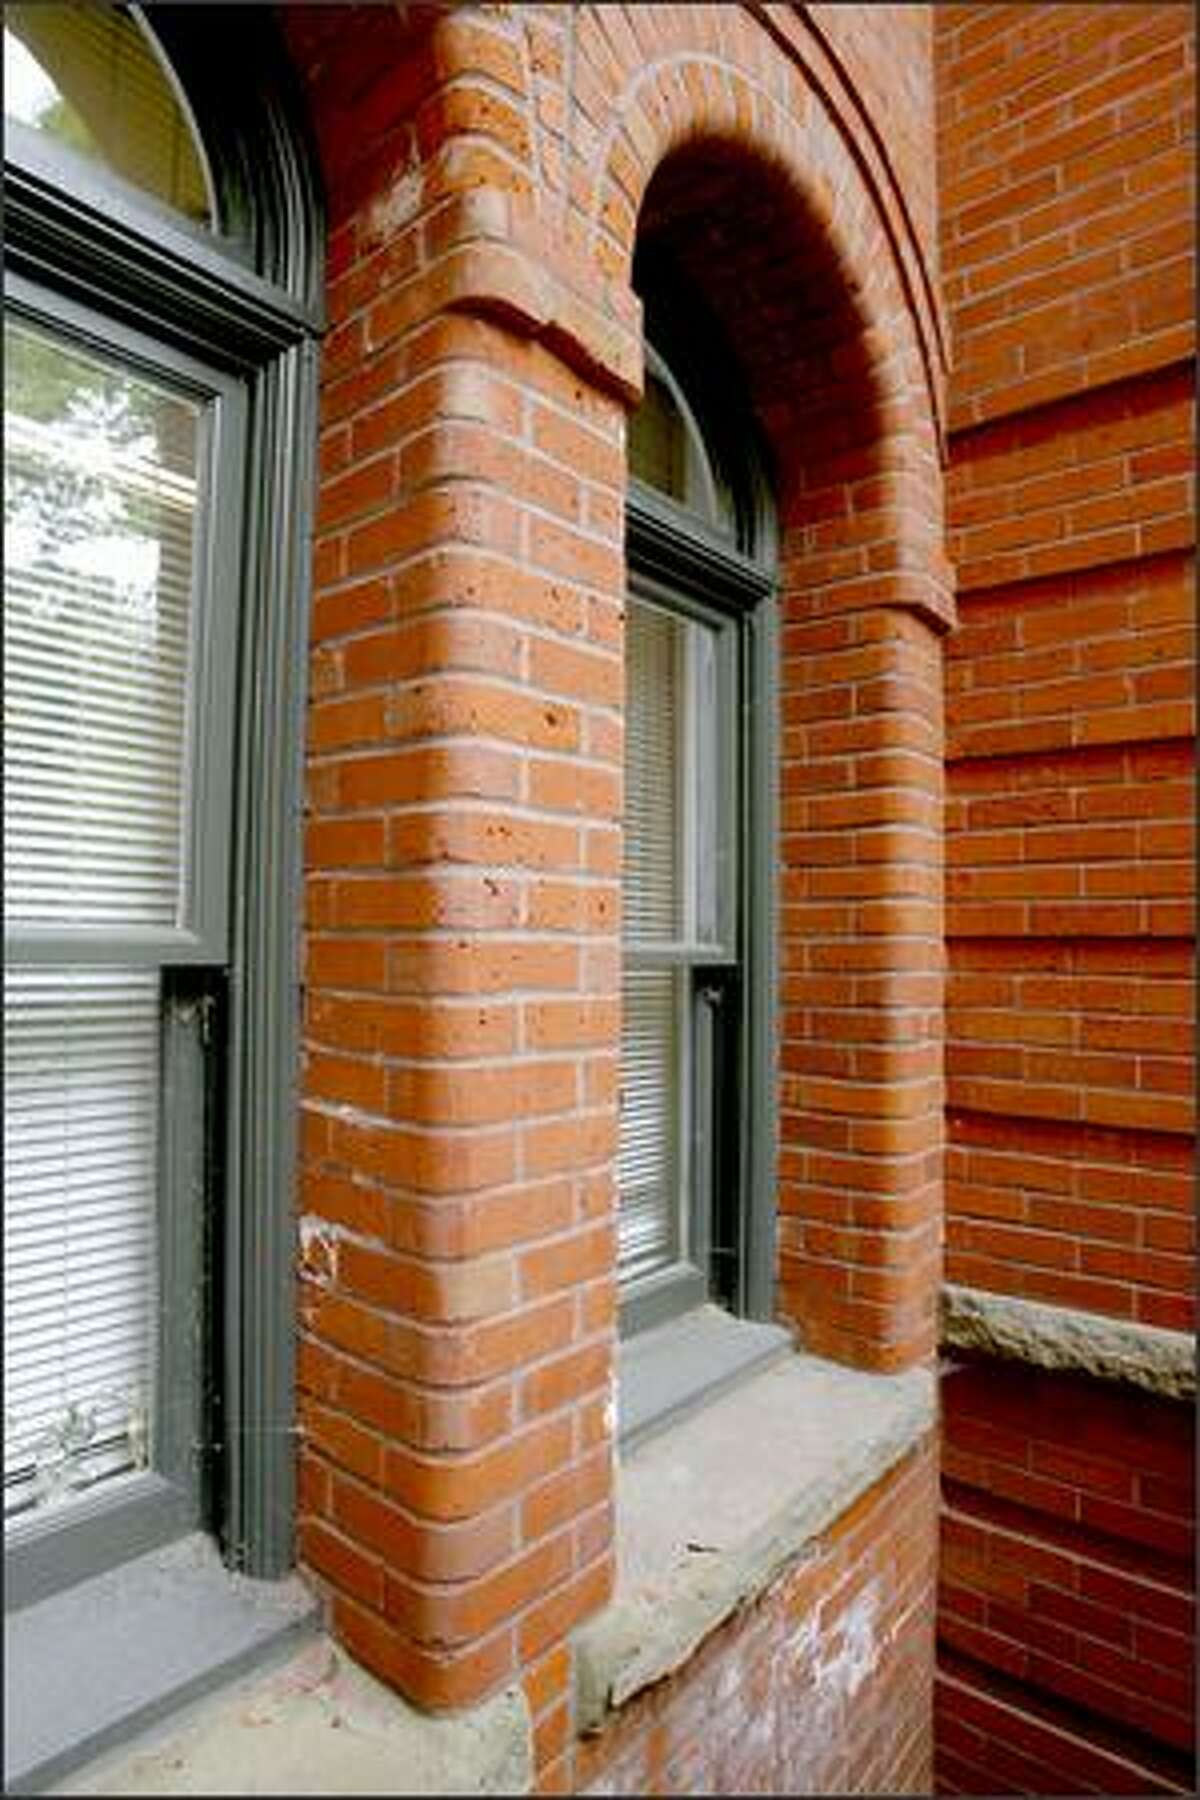 Rounded bricks at a window implant in UW's Parrington Hall are a welcoming gesture.